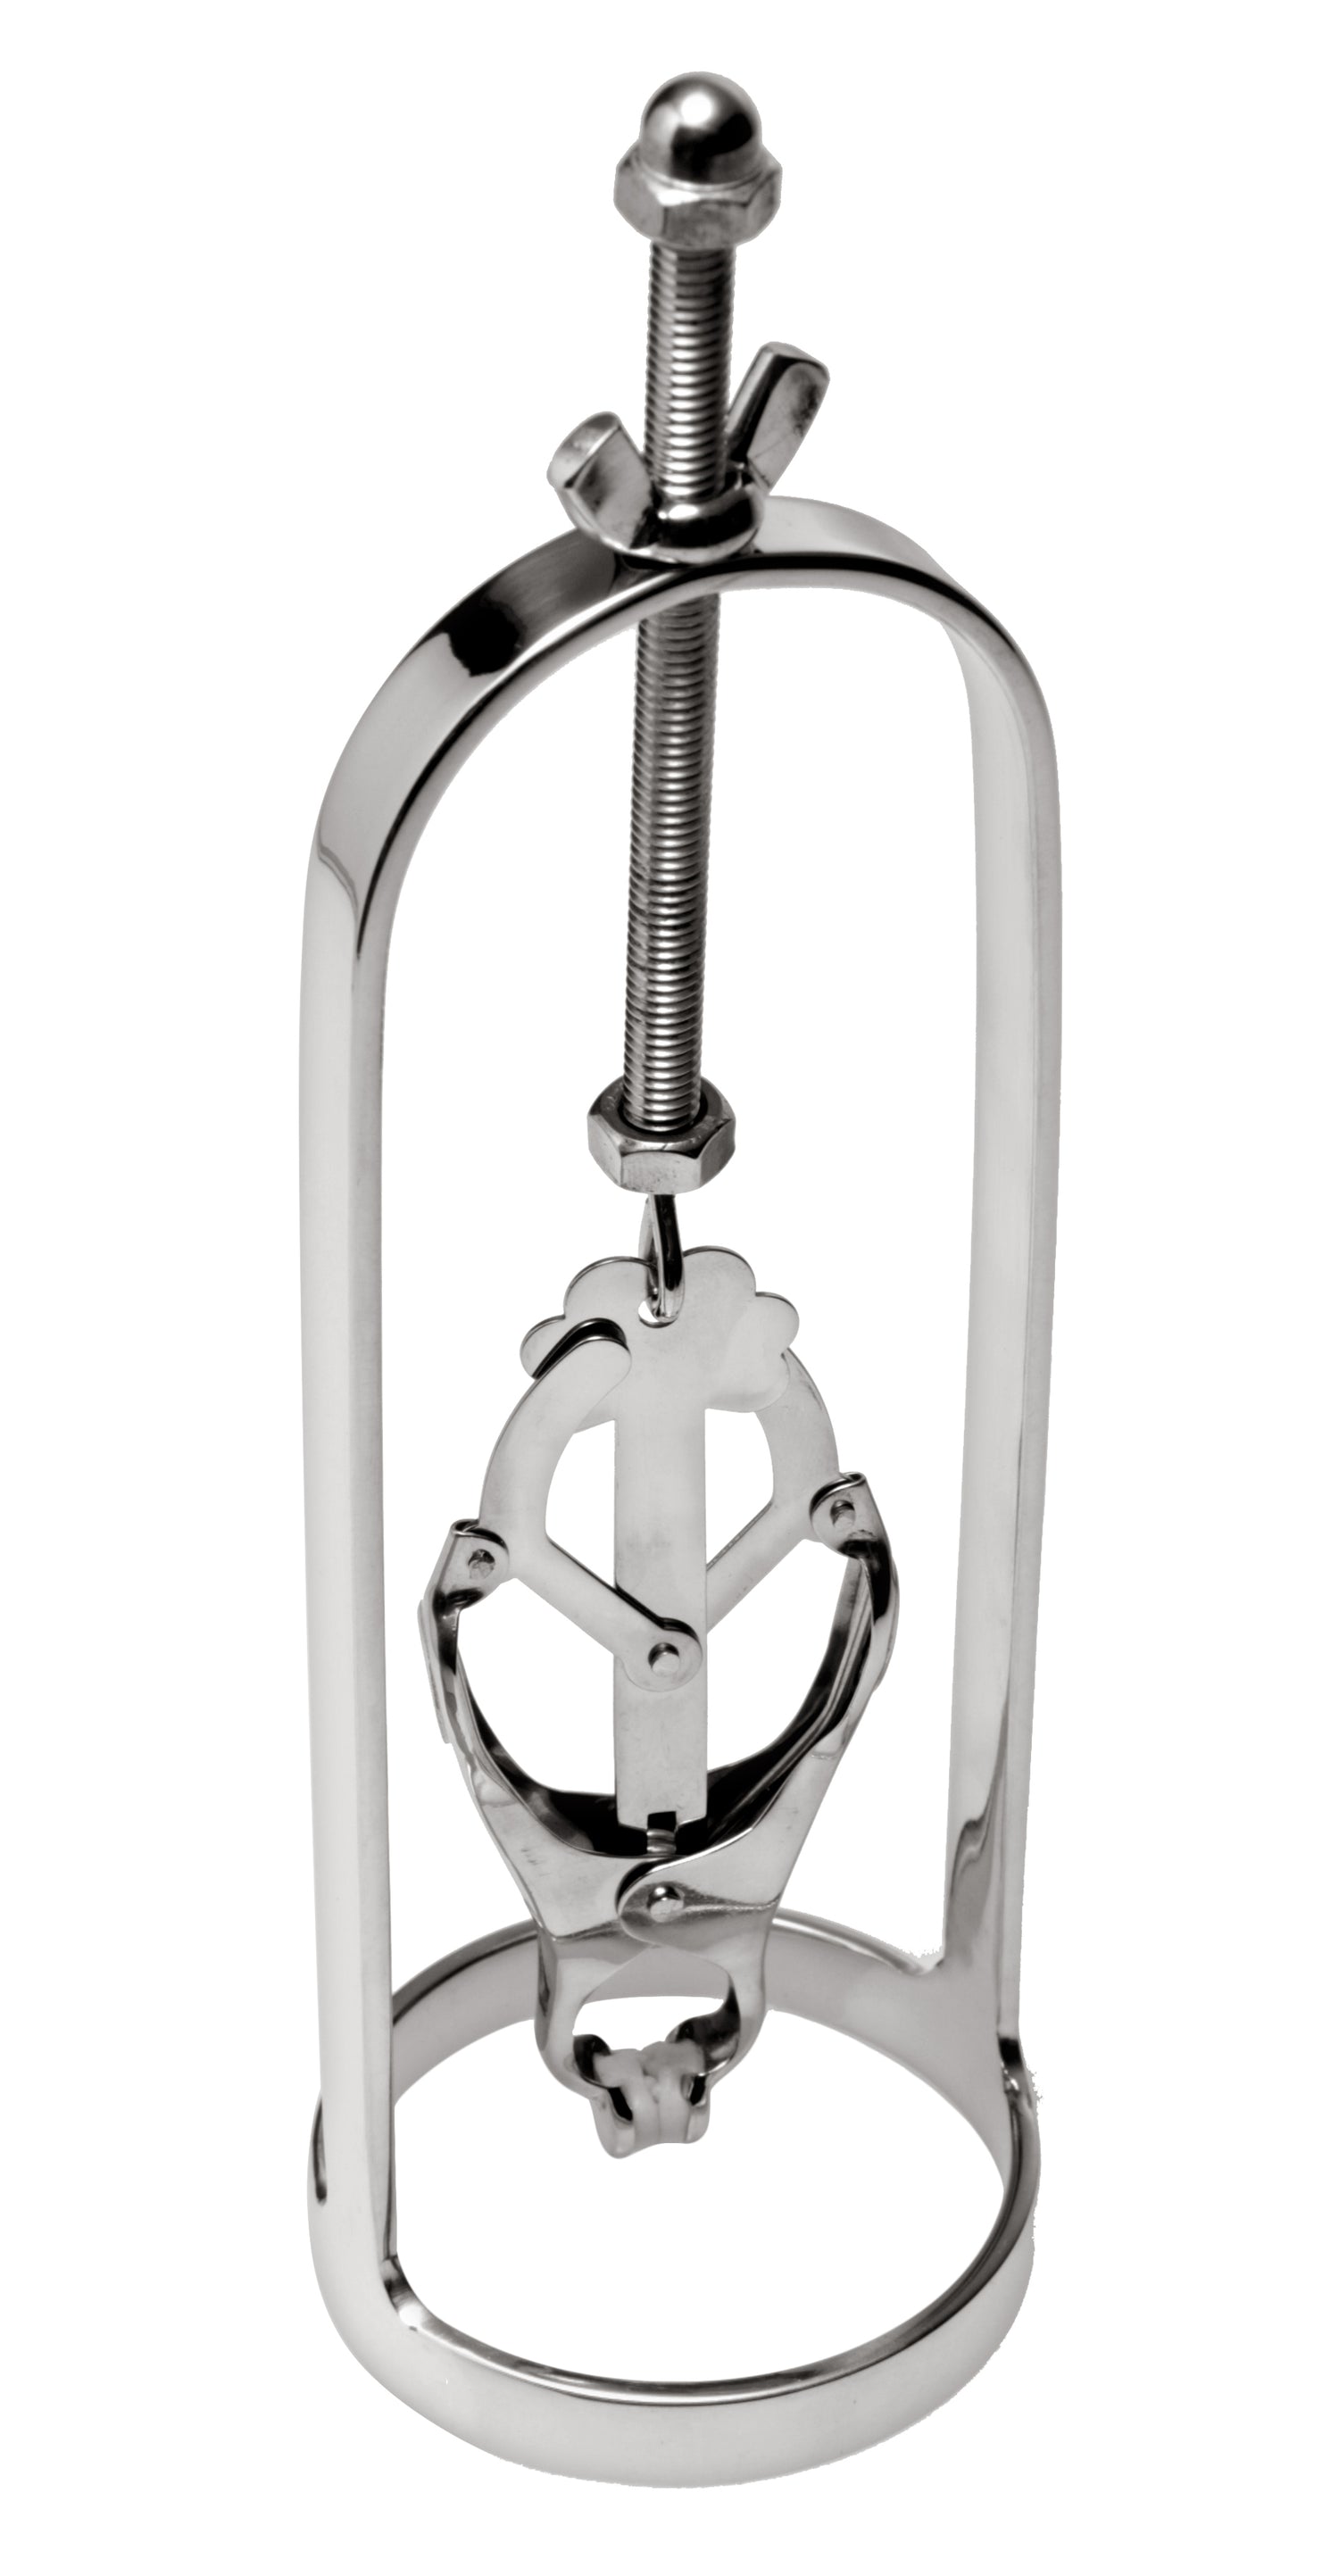 Stainless Steel Clover Clamp Nipple Stretcher - Just for you desires